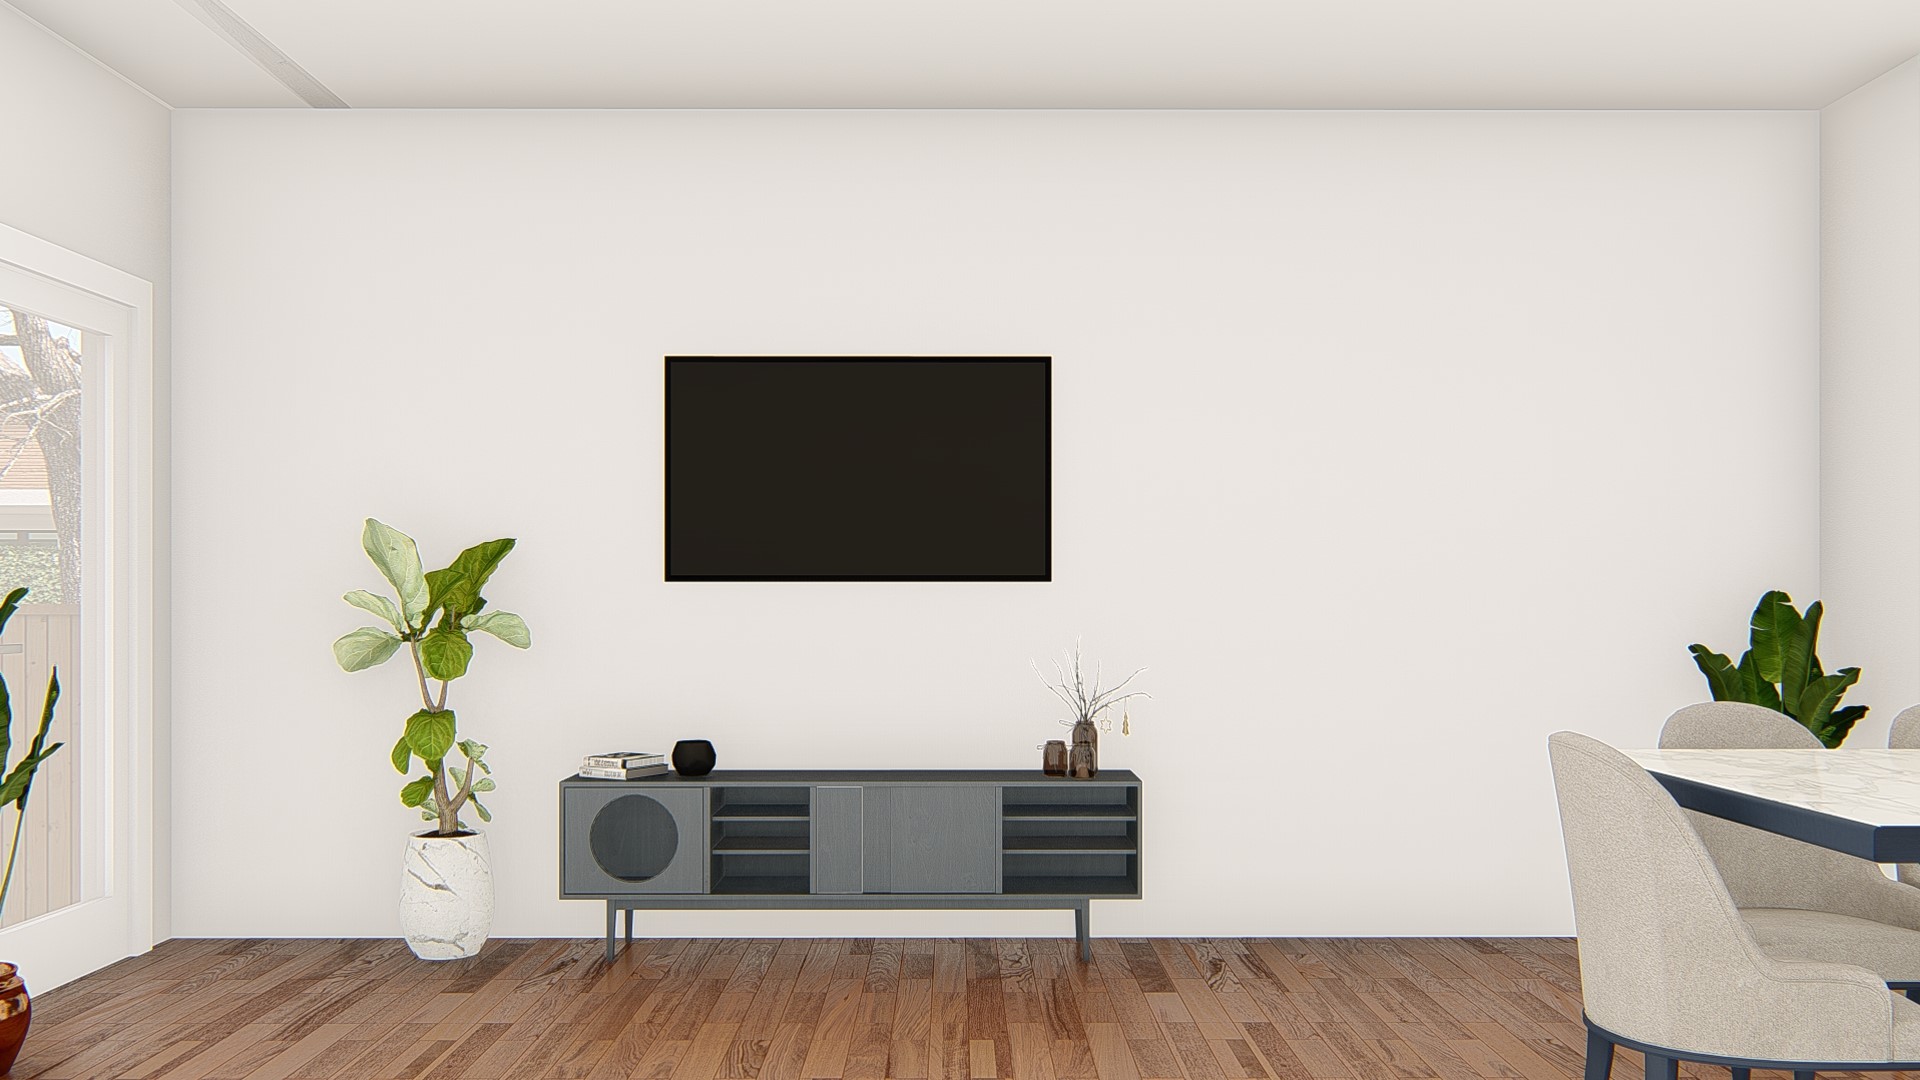 LIVING ROOM. This image is a close rendering of the final product